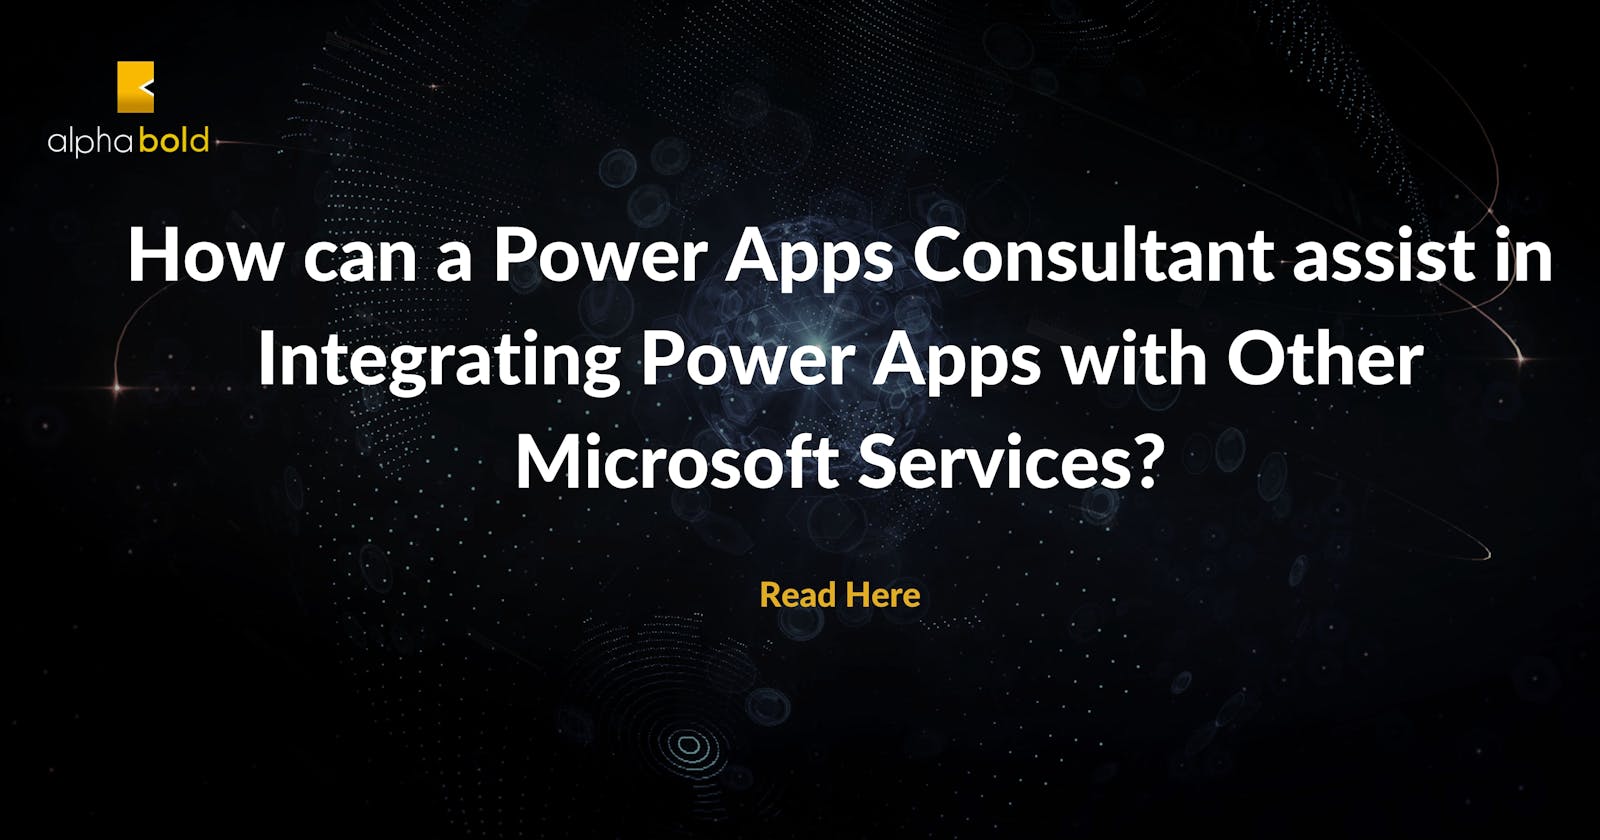 How can a Power Apps Consultant assist in Integrating Power Apps with Other Microsoft Services?